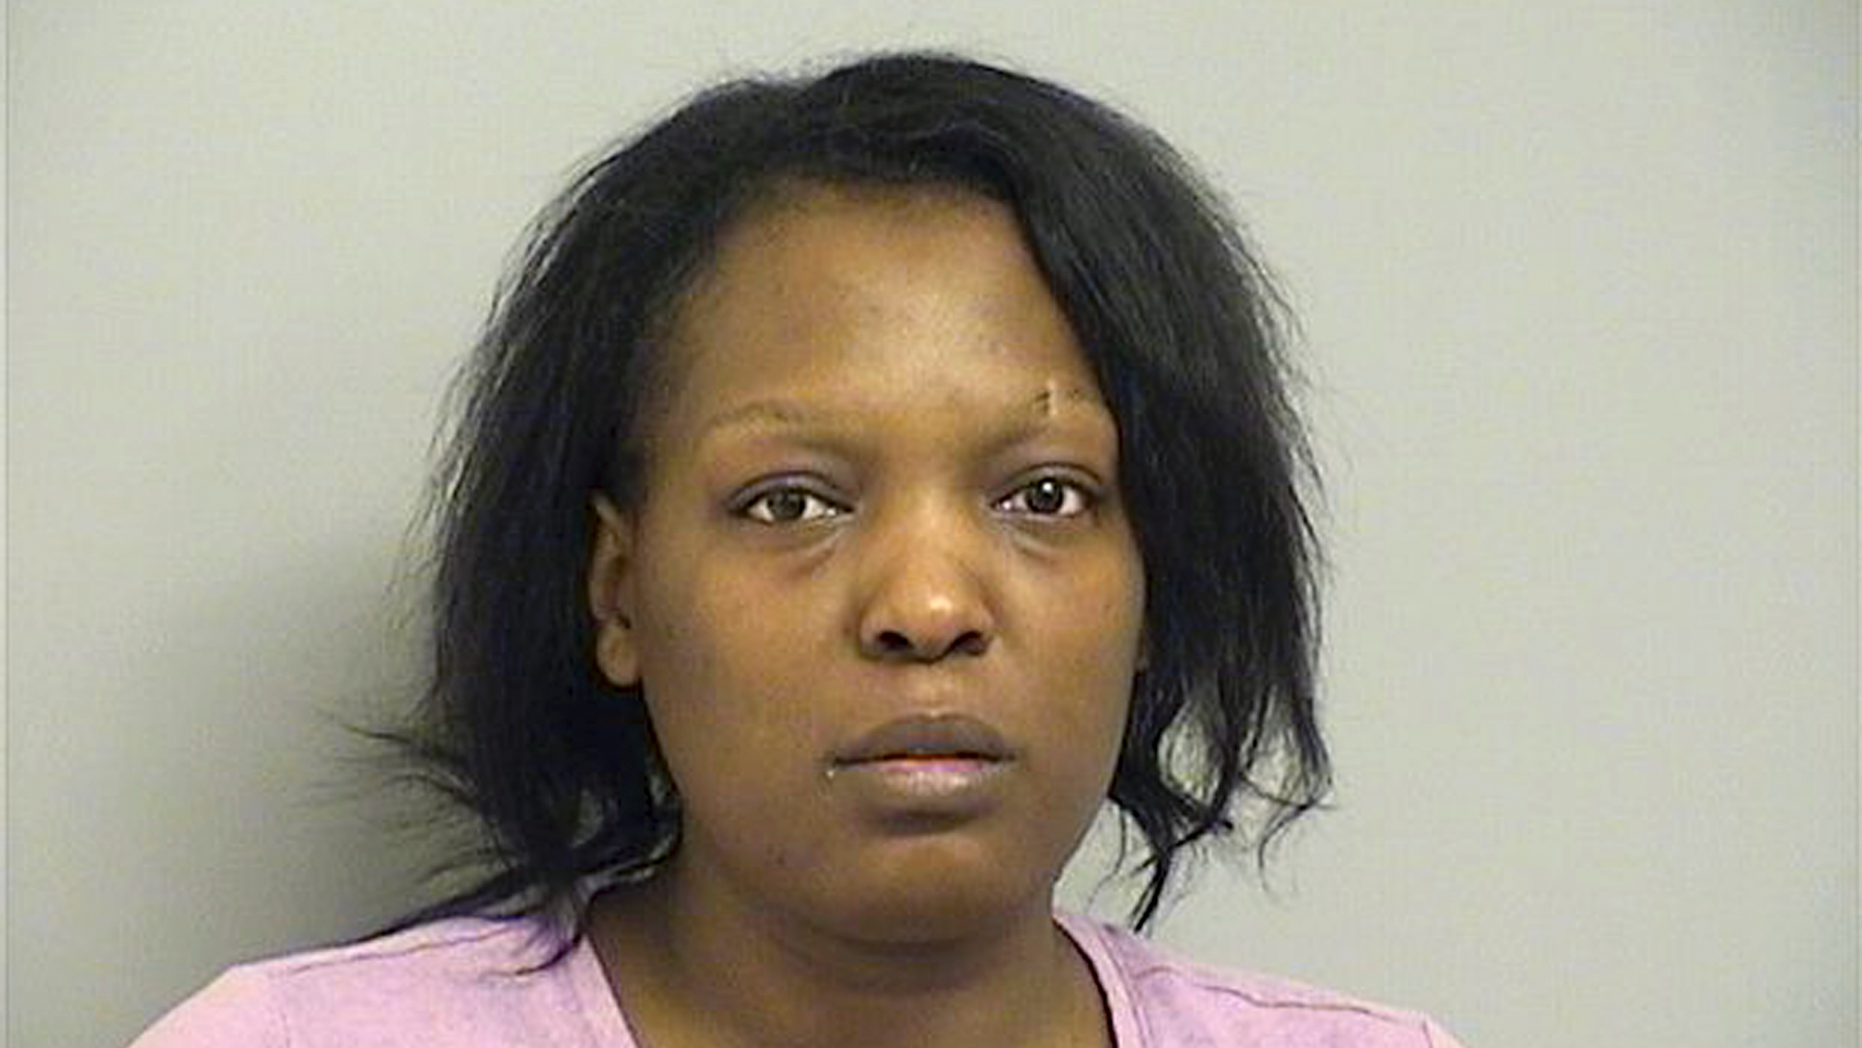 On Tuesday, March 26, 2019, a reservation provided by the Sheriff County Department of Tulsa shows Deionna Young, 25, detained without engagement on Tuesday under the charge of first degree murder in Tulsa. Police said that Young, a restaurant manager from Oklahoma, had been charged with killing an abusive client, Desean Tallent, after reporting he had threatened her, then left and then returned. Police said Tallent had returned later, but had started. Young followed him and shot him, then went back to work. (Sheriff's County Department of Tulsa via AP)